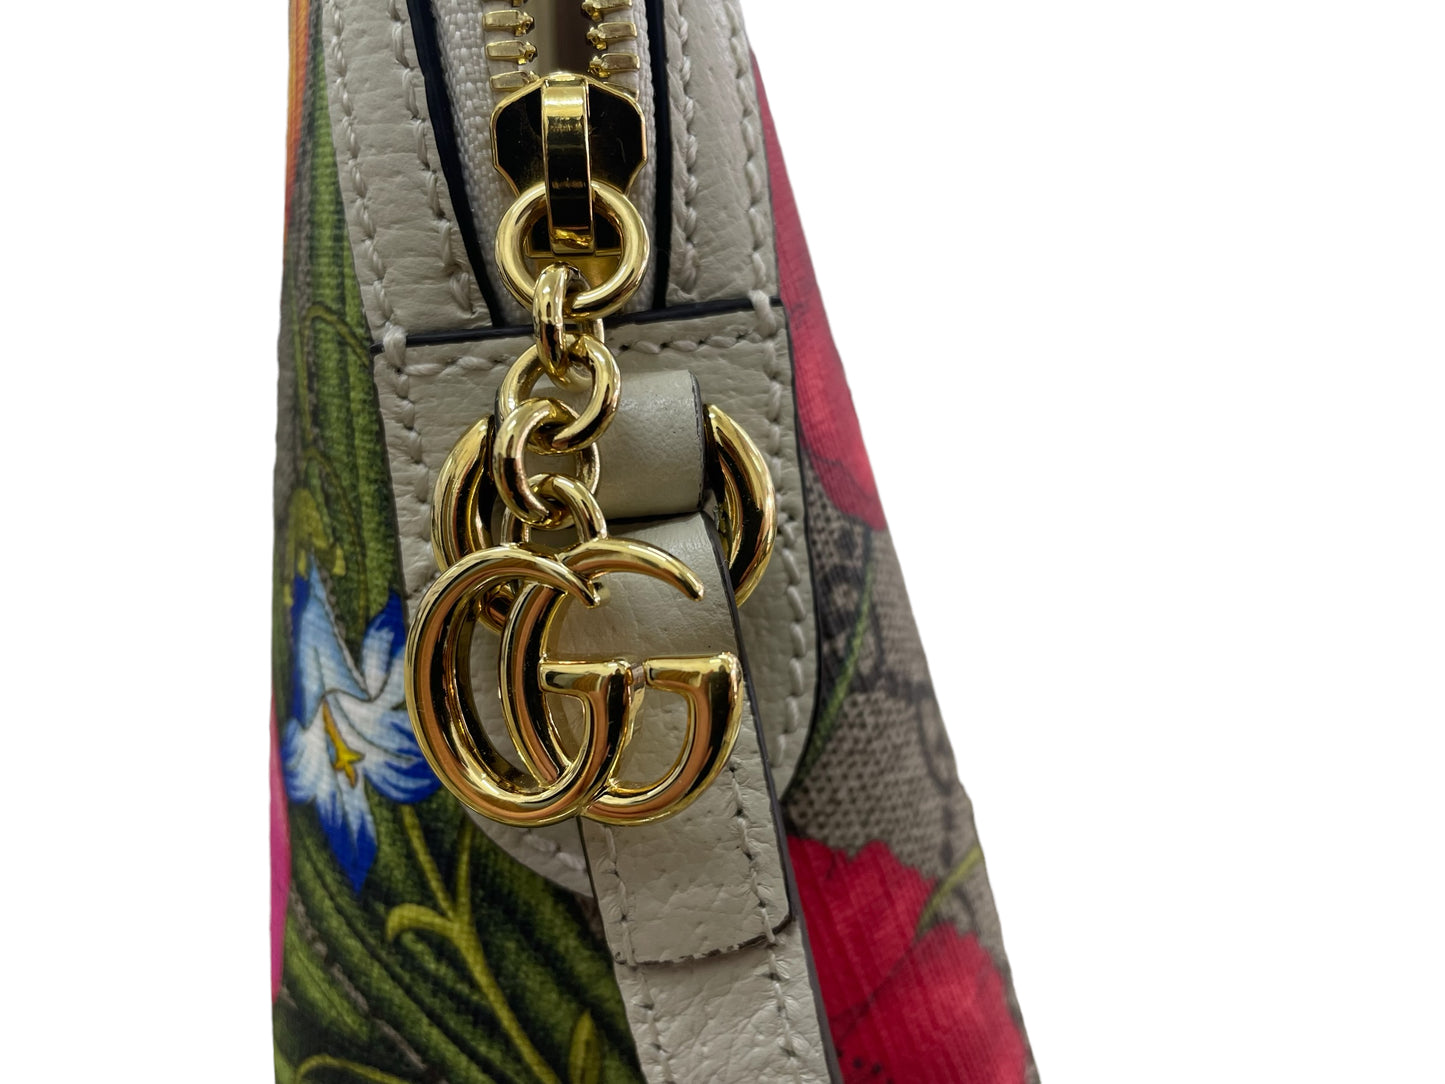 GUCCI Ophidia Small Shoulder Bag GG Flora Flower Gold Hardware White